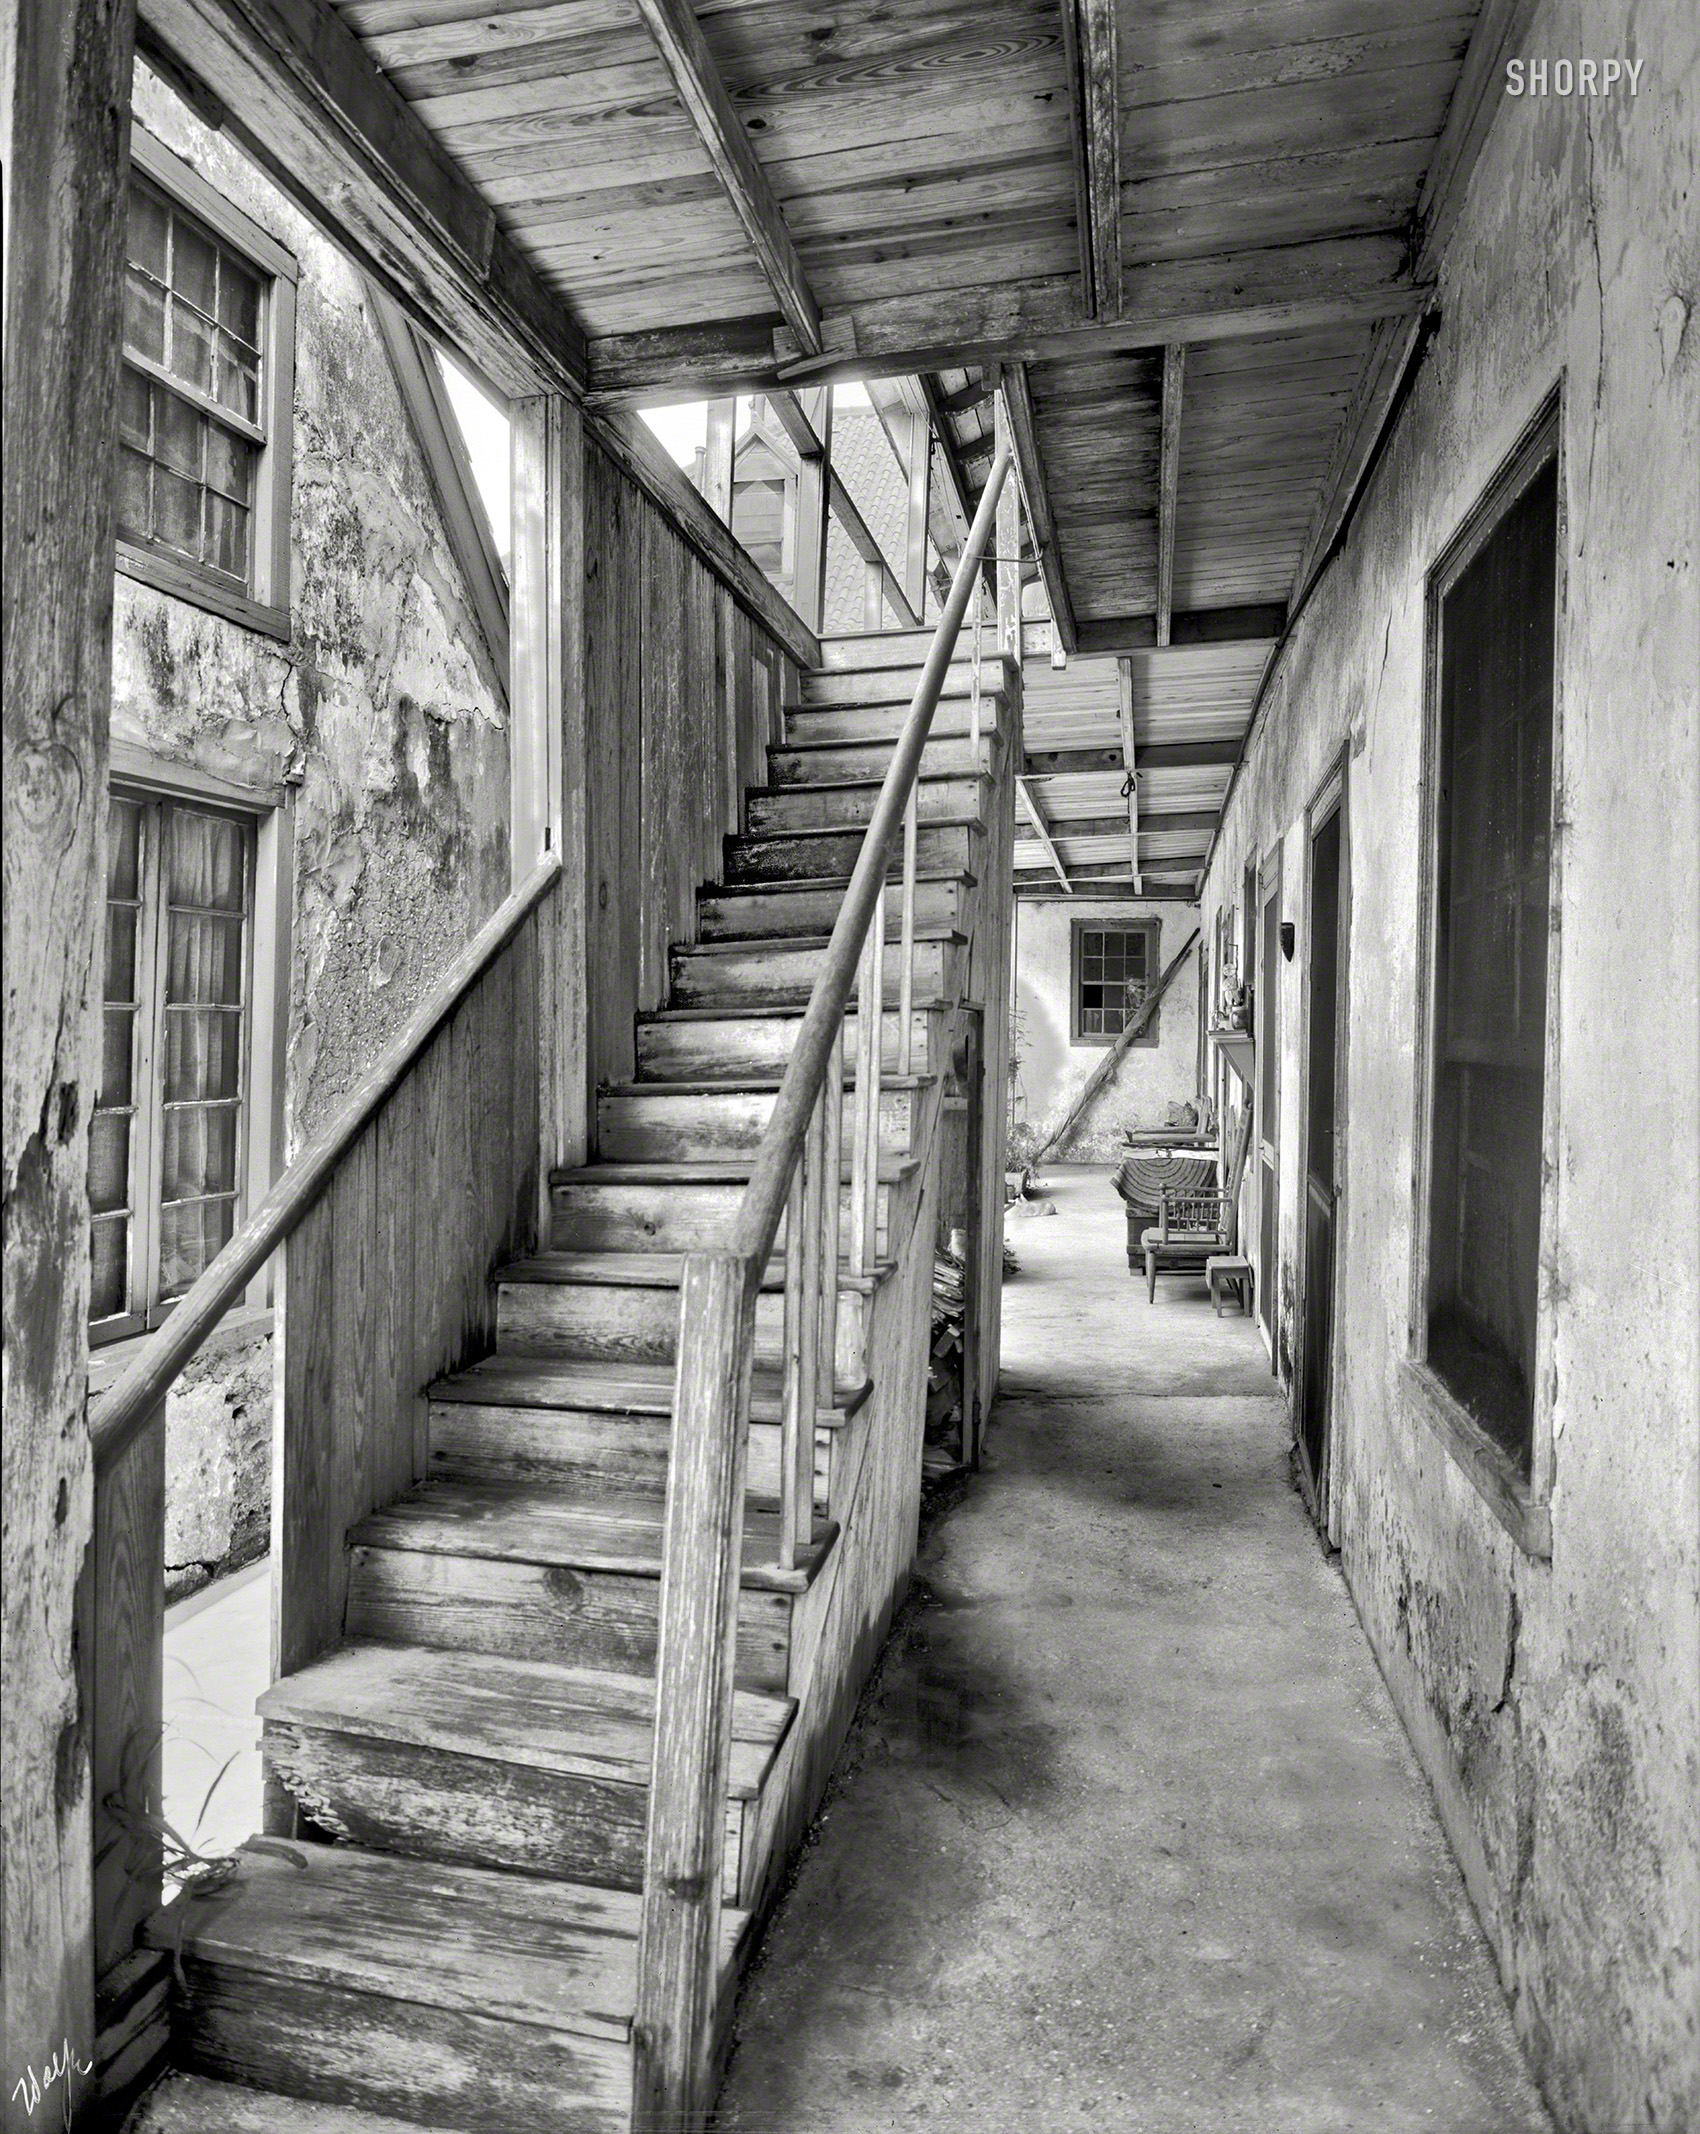 Circa 1936. "Ximenez-Fatio House, St. Augustine, Florida. Dr. Chatelain's photographs, P.A. Wolfe, photographer." From Frances Benjamin Johnston's work for the Carnegie Survey of Architecture of the South. View full size.